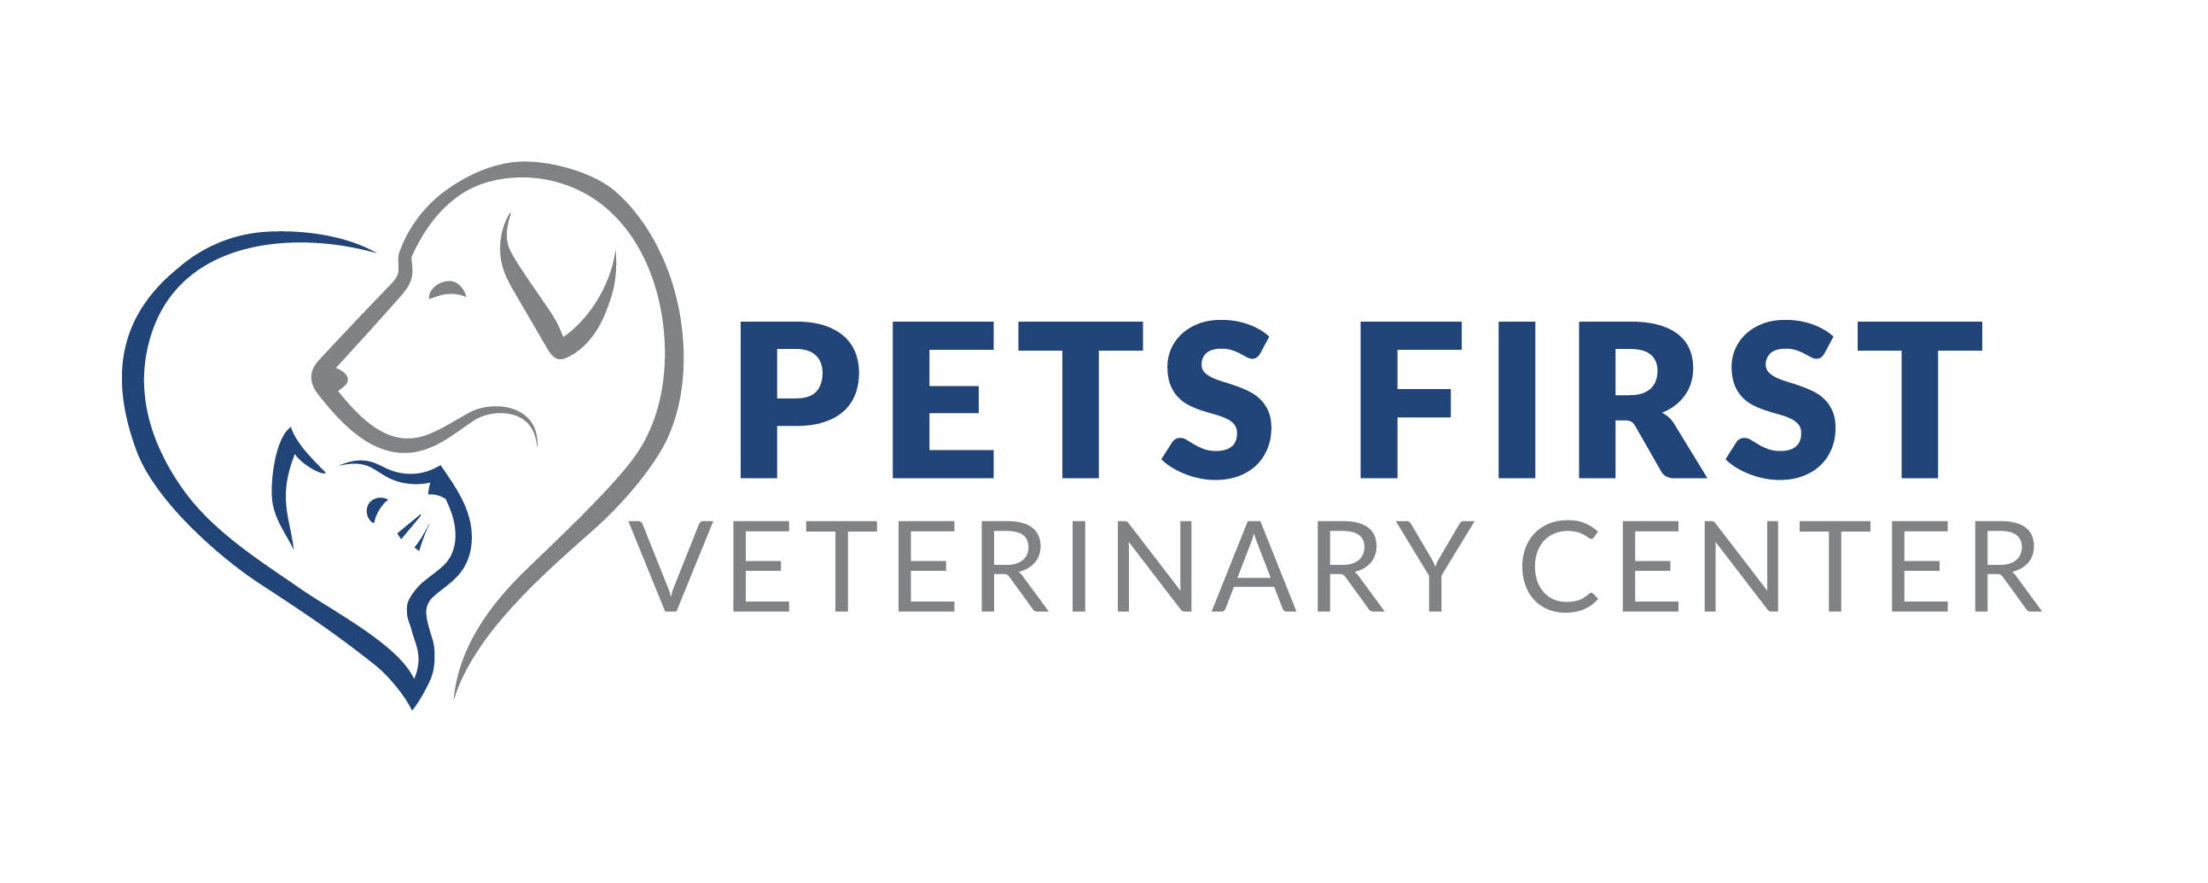 Pets First Veterinary Center